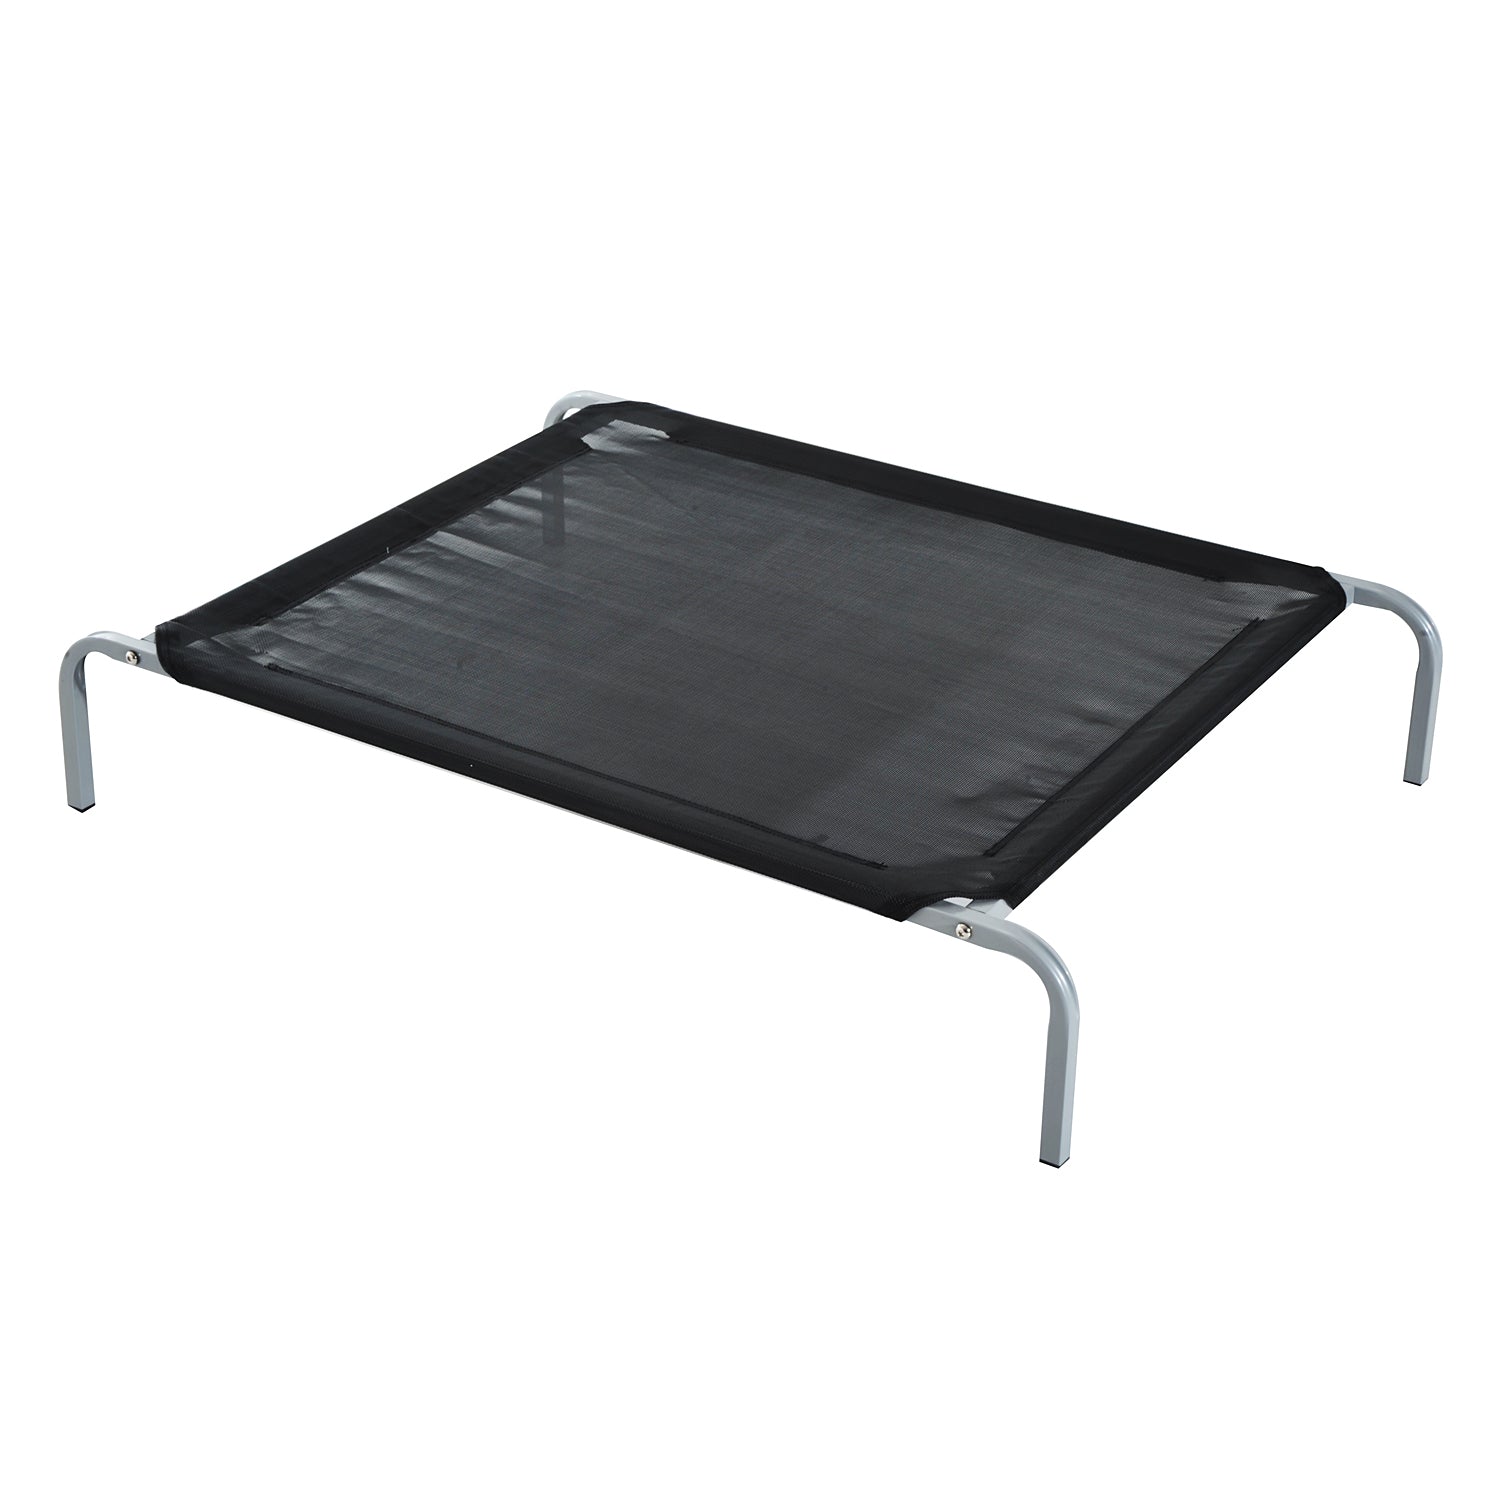 Large Dogs Portable Elevated Fabric Bed for Camping Outdoors Black